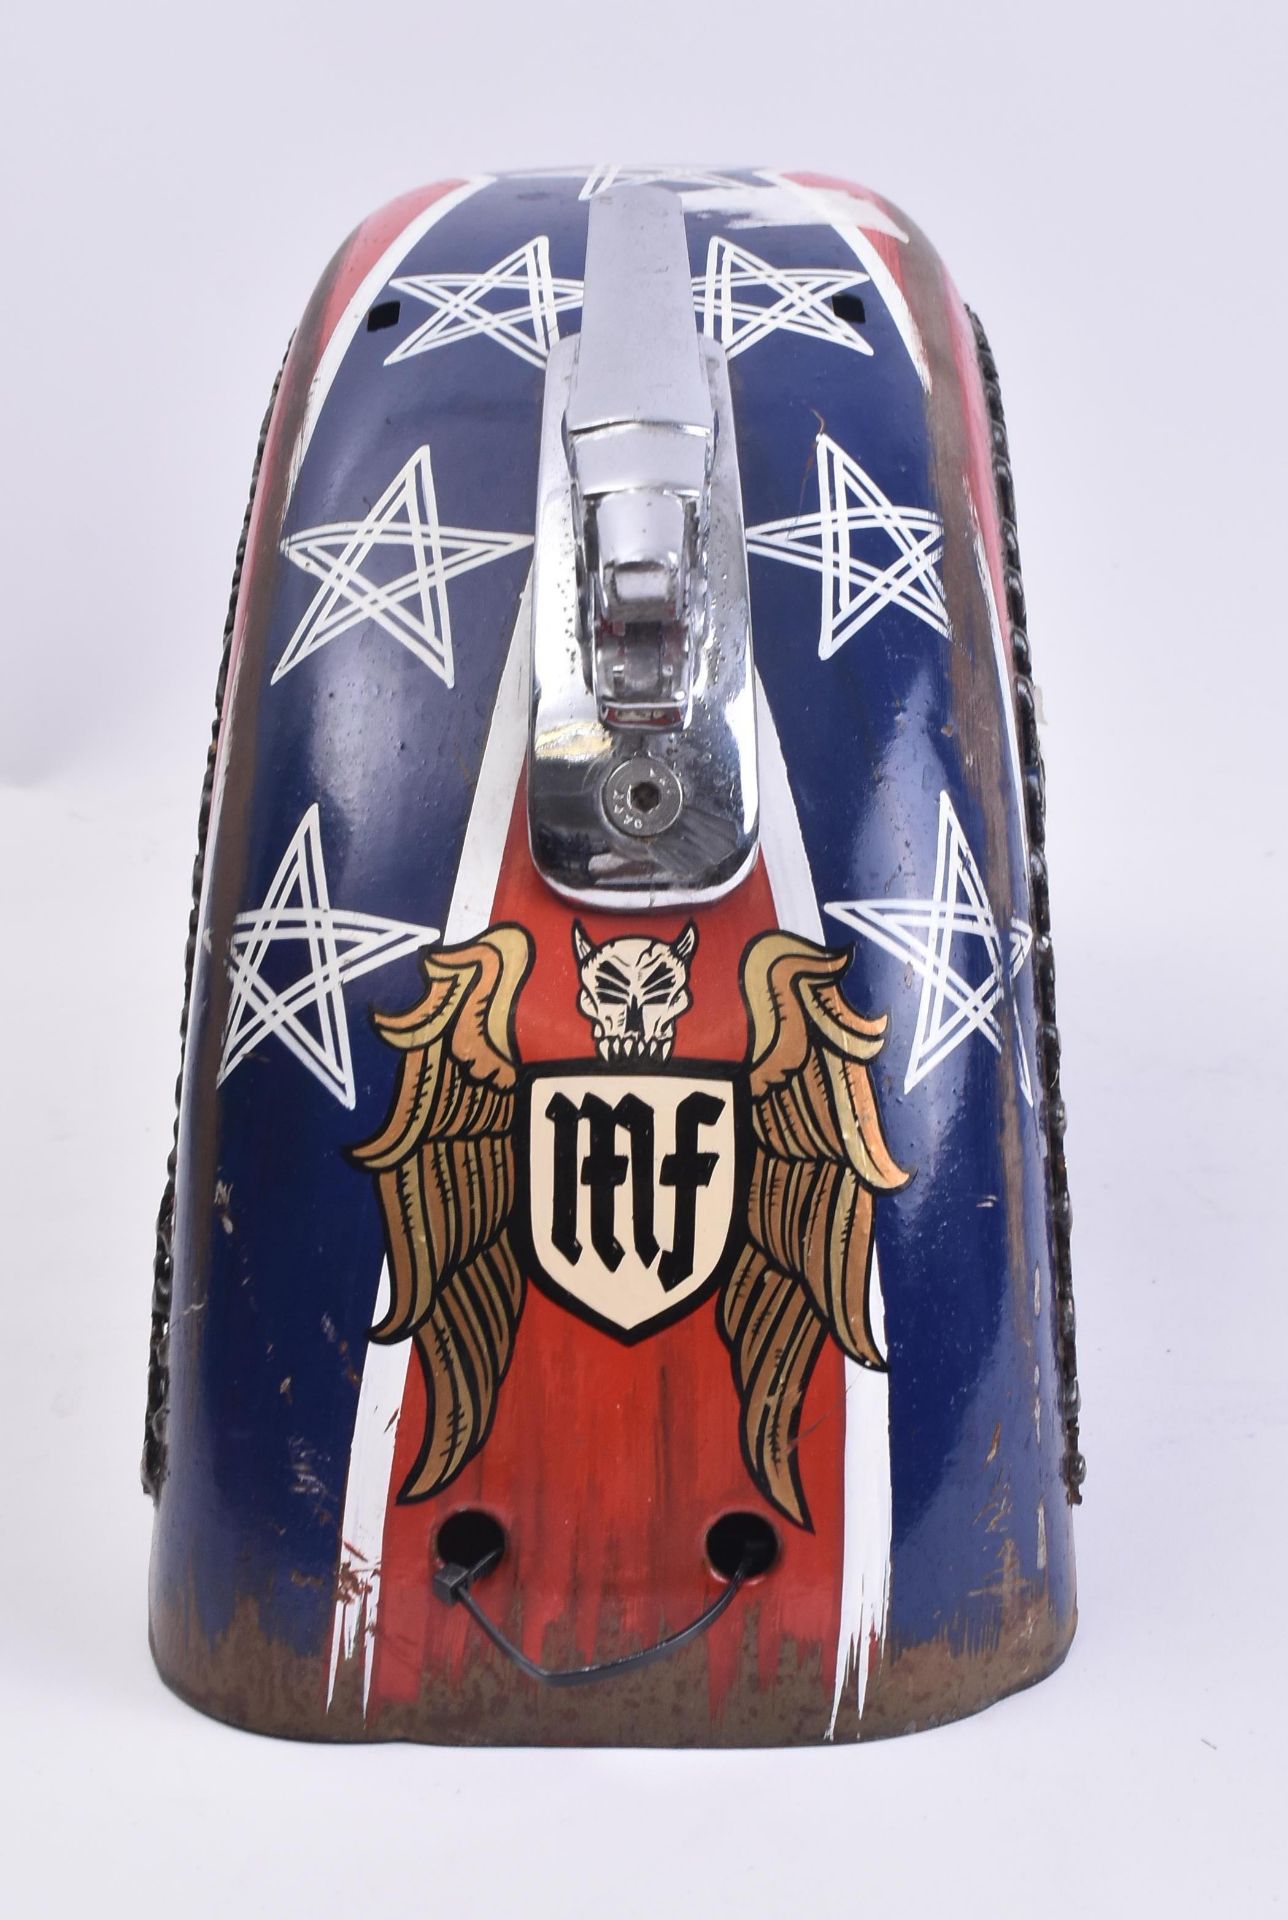 VINTAGE STARS & STRIPES STYLE CAR TYRE COVER & MASCOT - Image 4 of 6